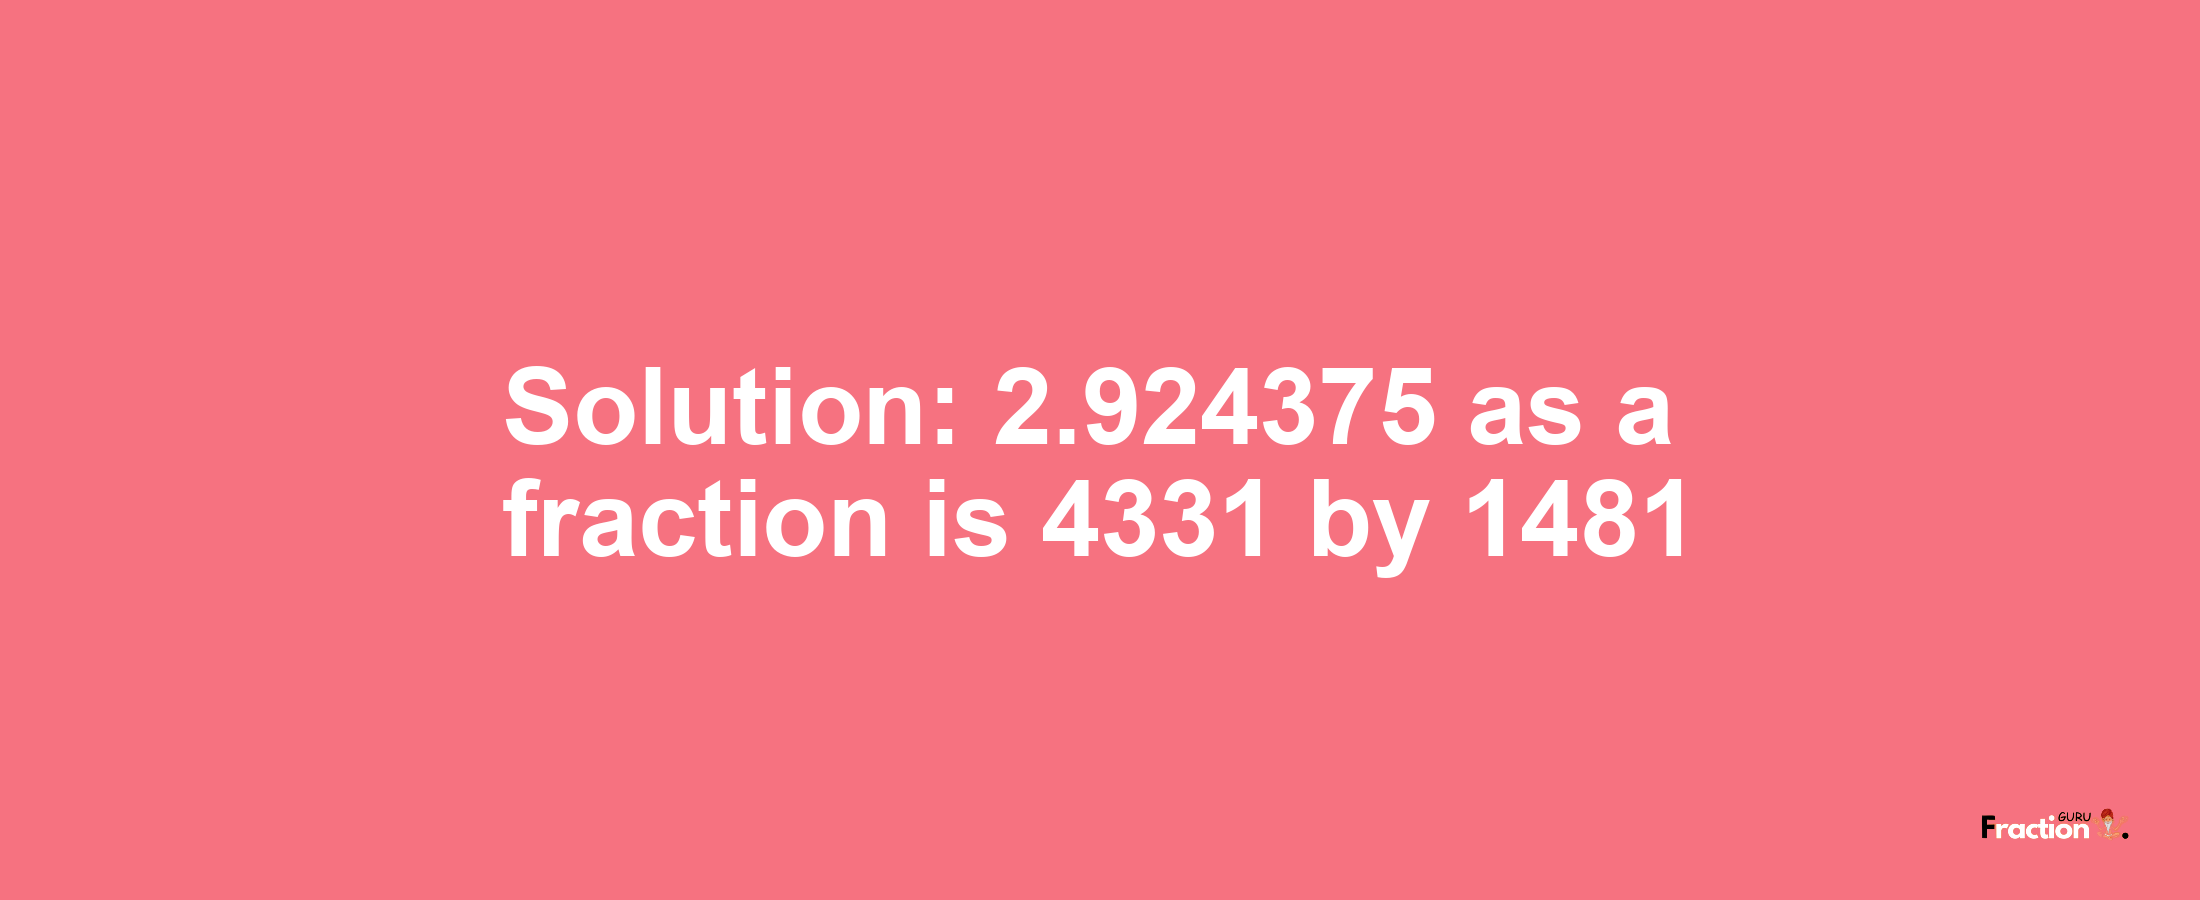 Solution:2.924375 as a fraction is 4331/1481